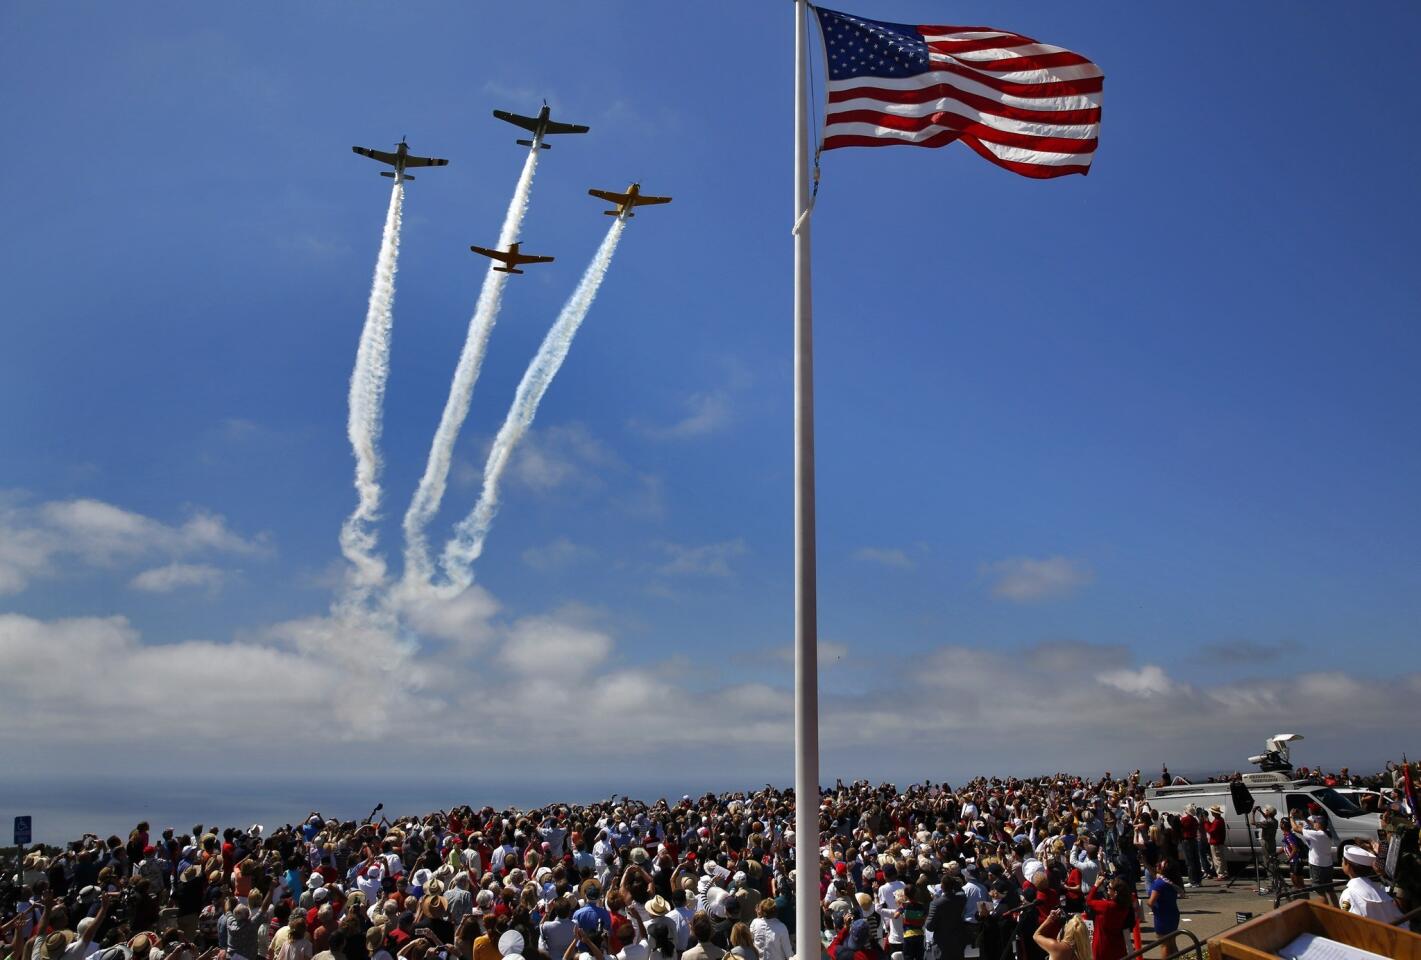 Four World War II-era T-34 planes fly over a crowd gathered at the Mt. Soledad Veterans Memorial in San Diego on Memorial Day.